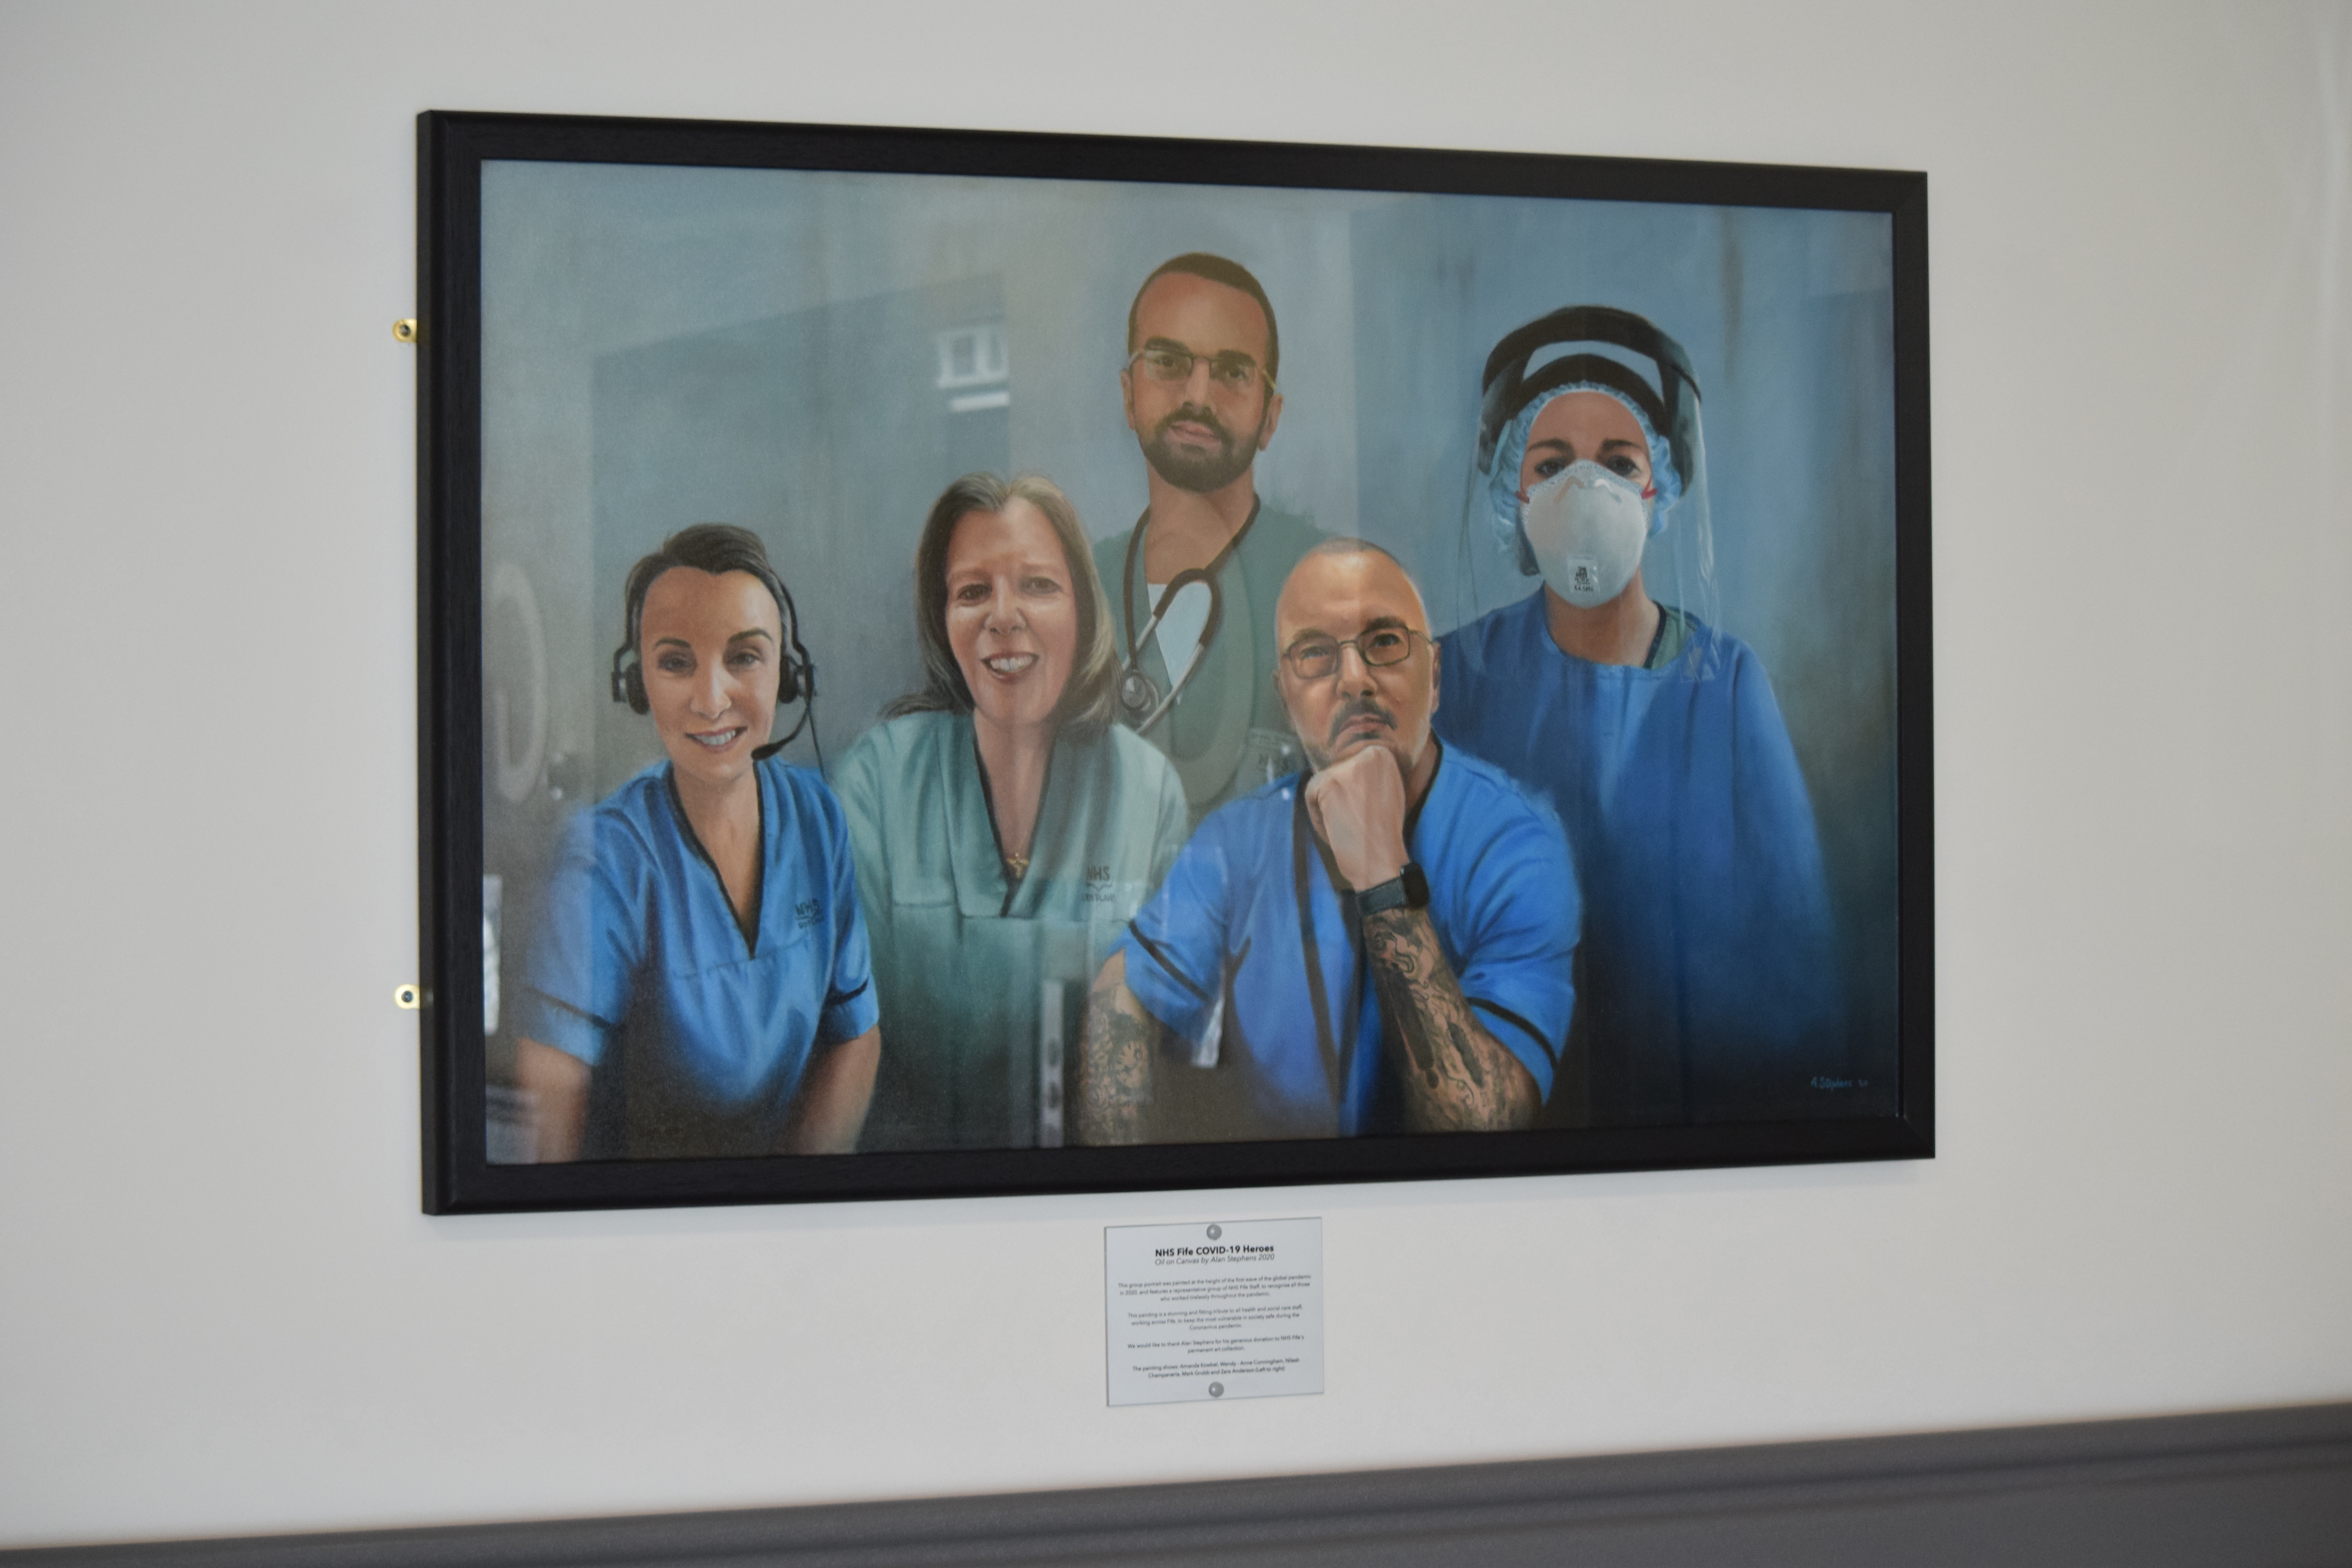 The artwork is located in the main thoroughfare leading to the hospital’s inpatient wards, in the newest wing of Victoria Hospital (Alan Stephens/NHS Fife)